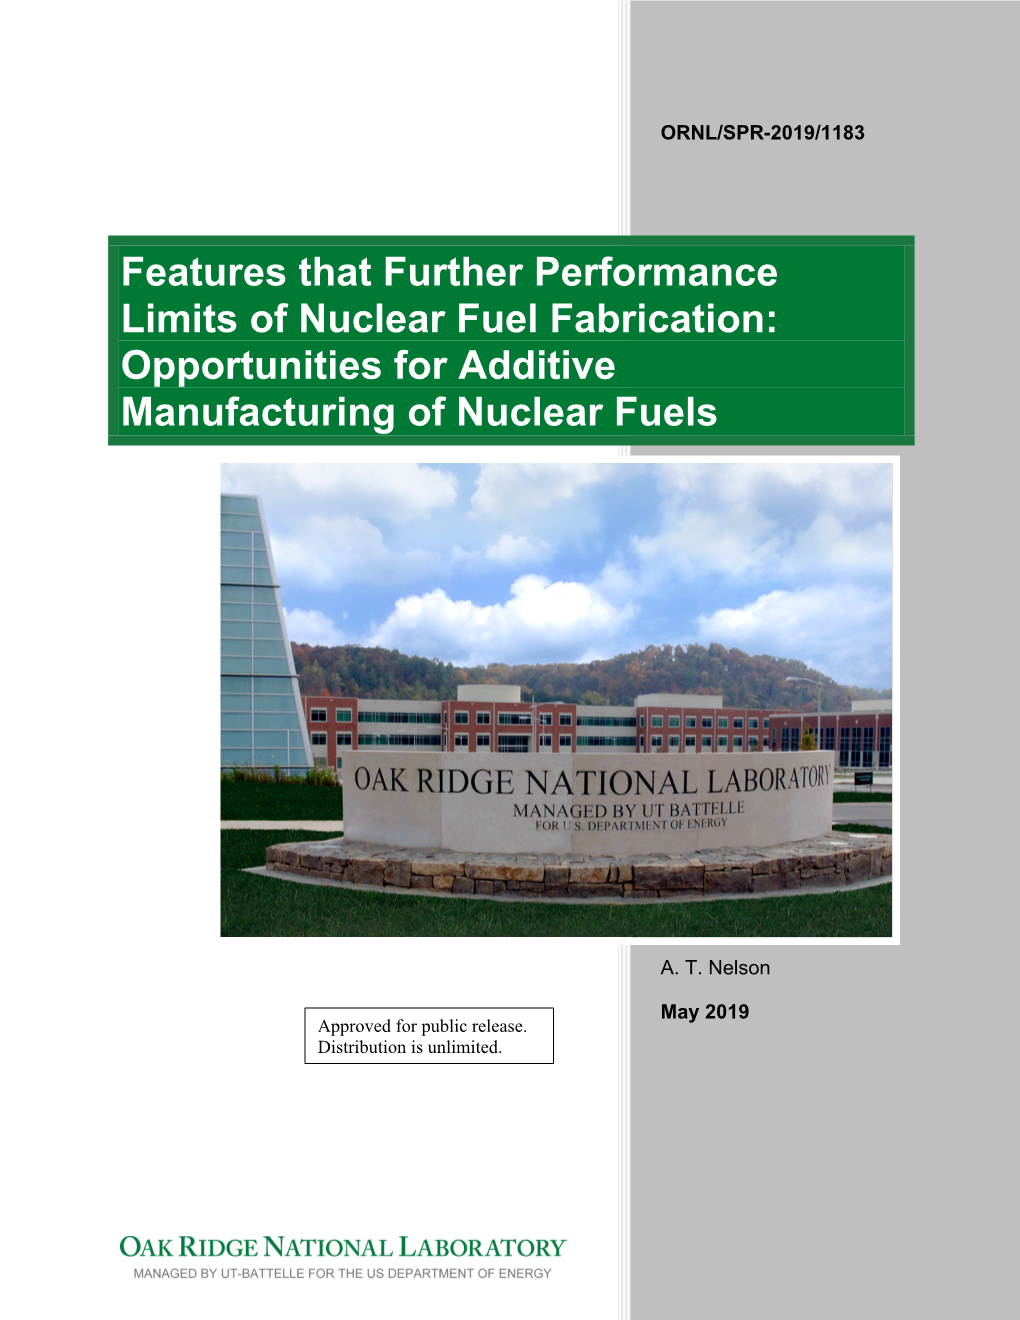 Opportunities for Additive Manufacturing of Nuclear Fuels